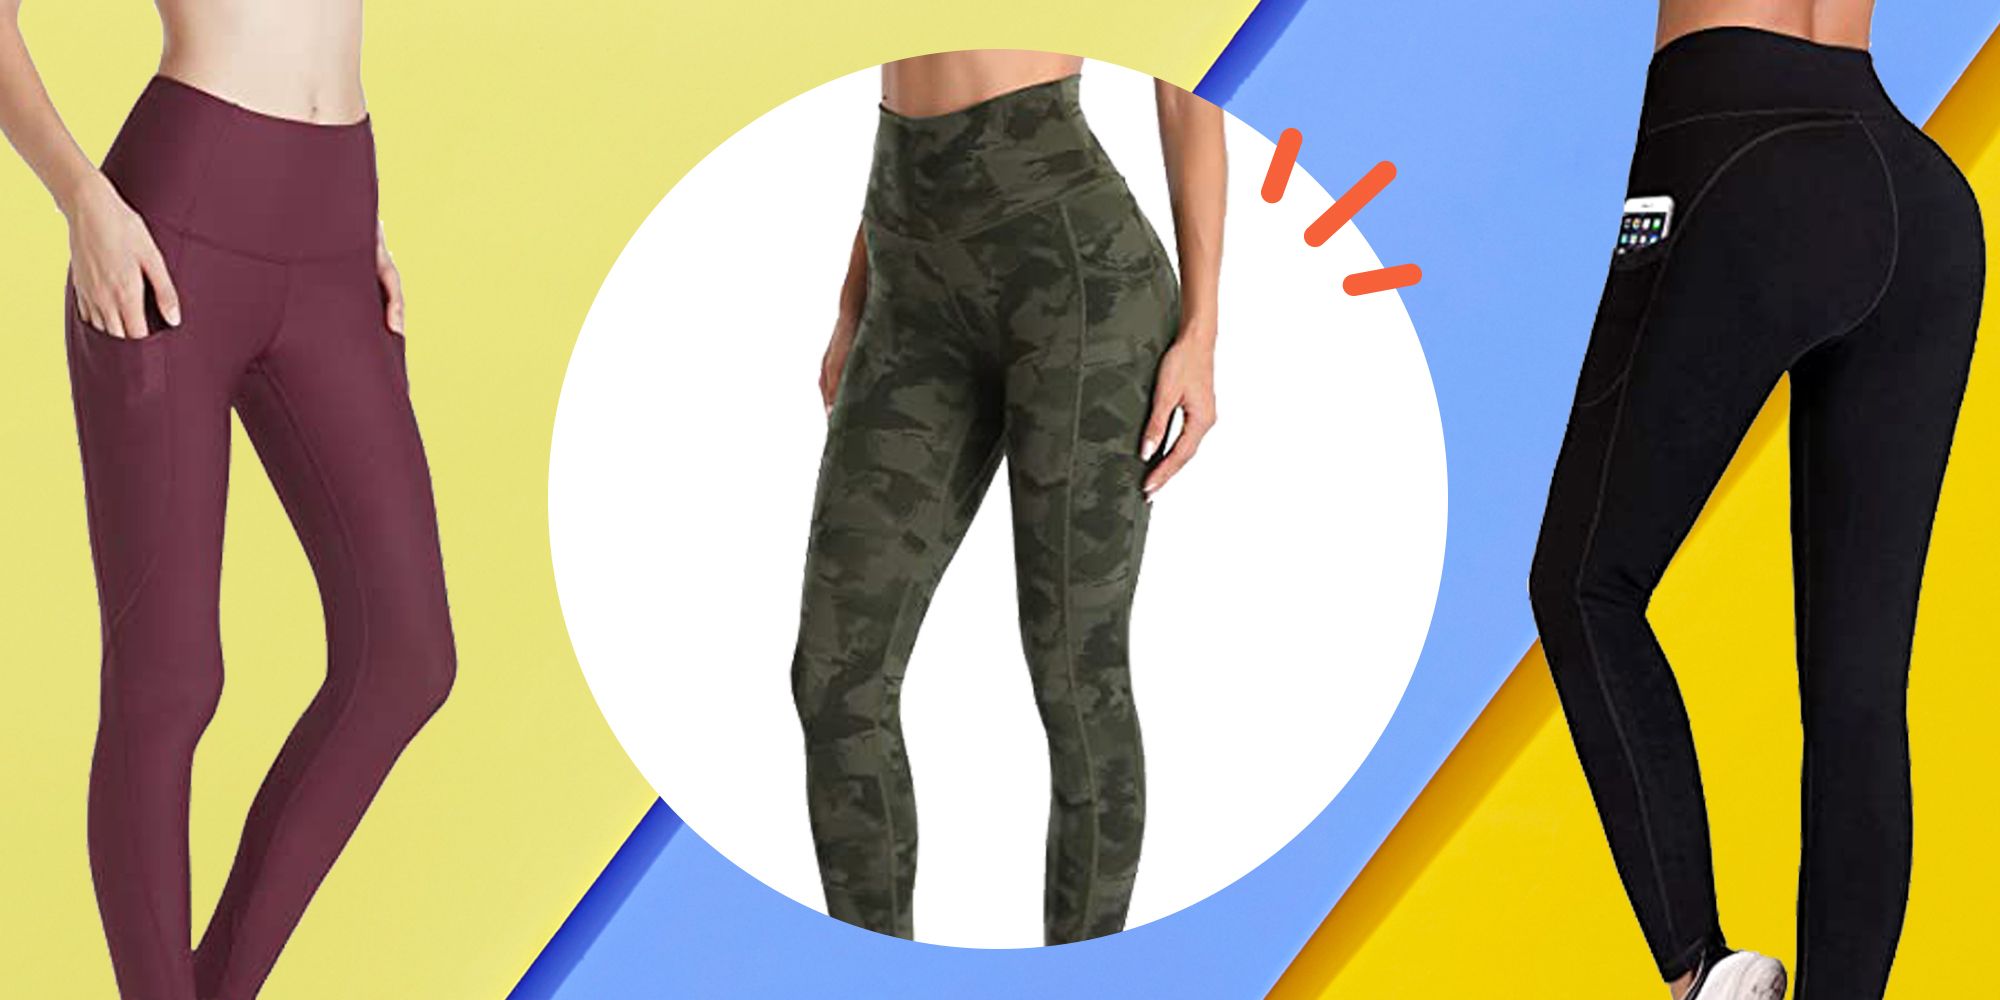 Gergeos Womens Yoga Leggings Fitness Running Gym Sports Active Pants Sweatpants with Pockets 